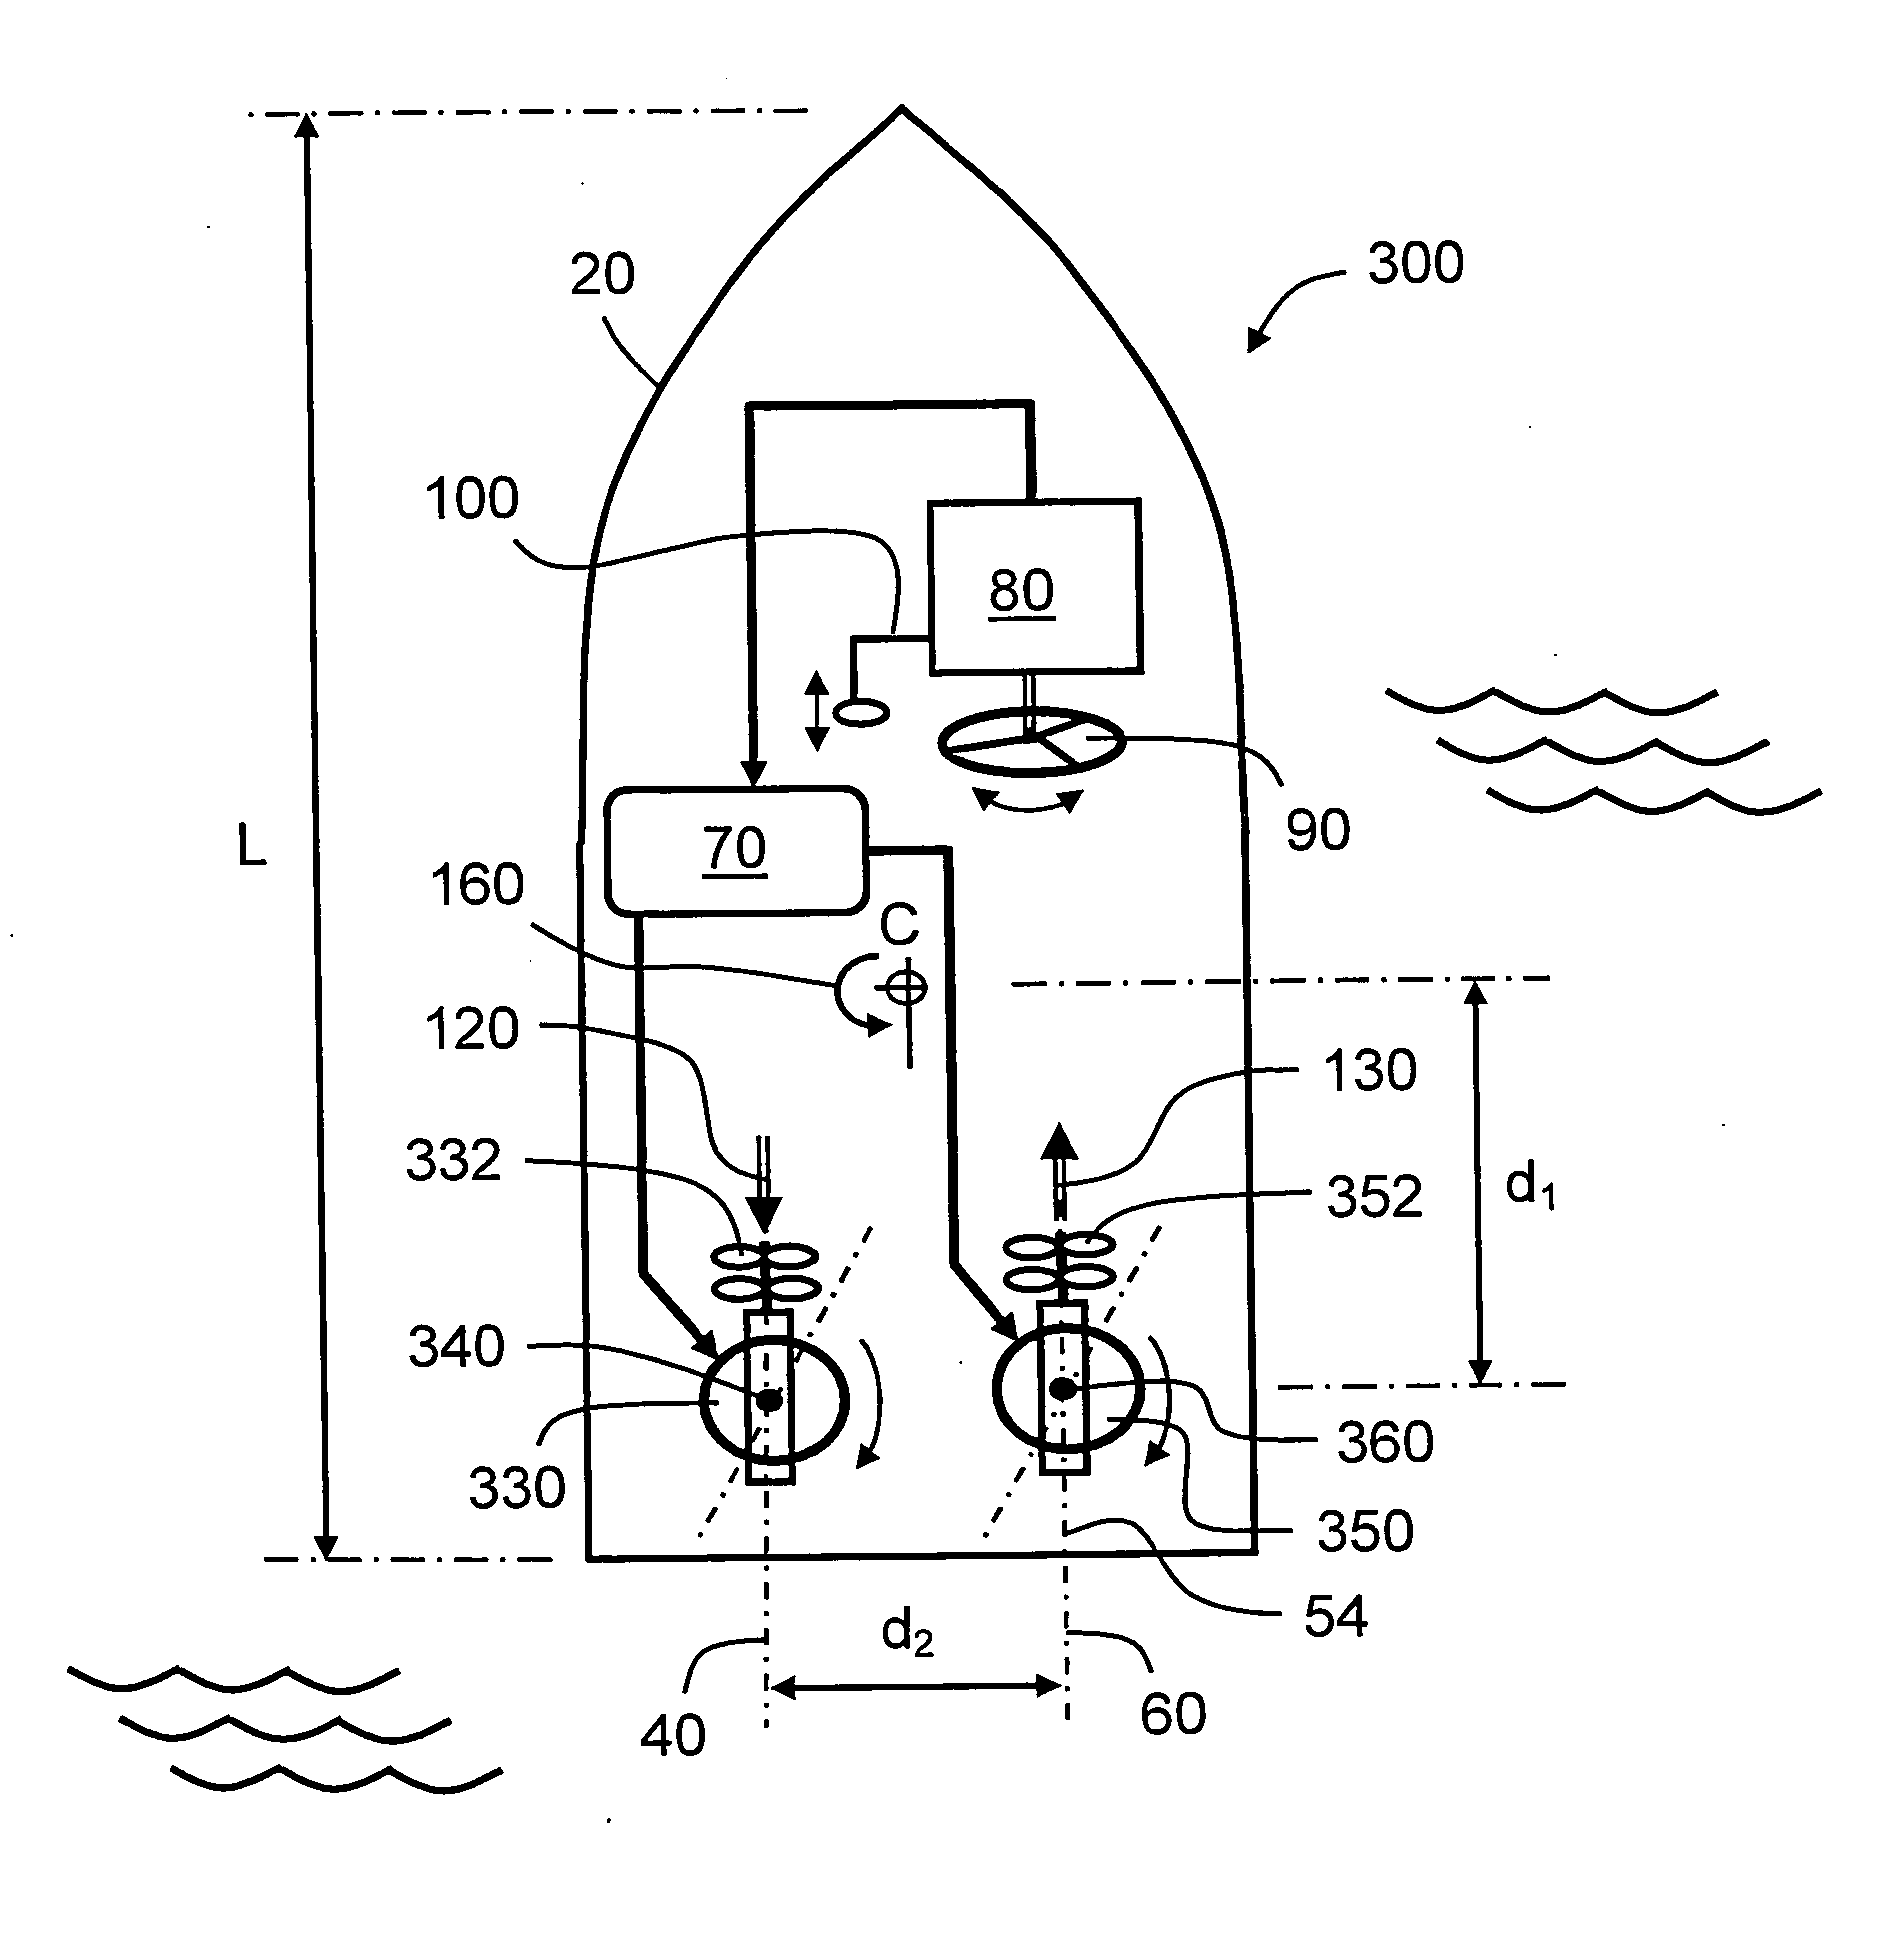 Method and system for maneuvering aquatic vessels